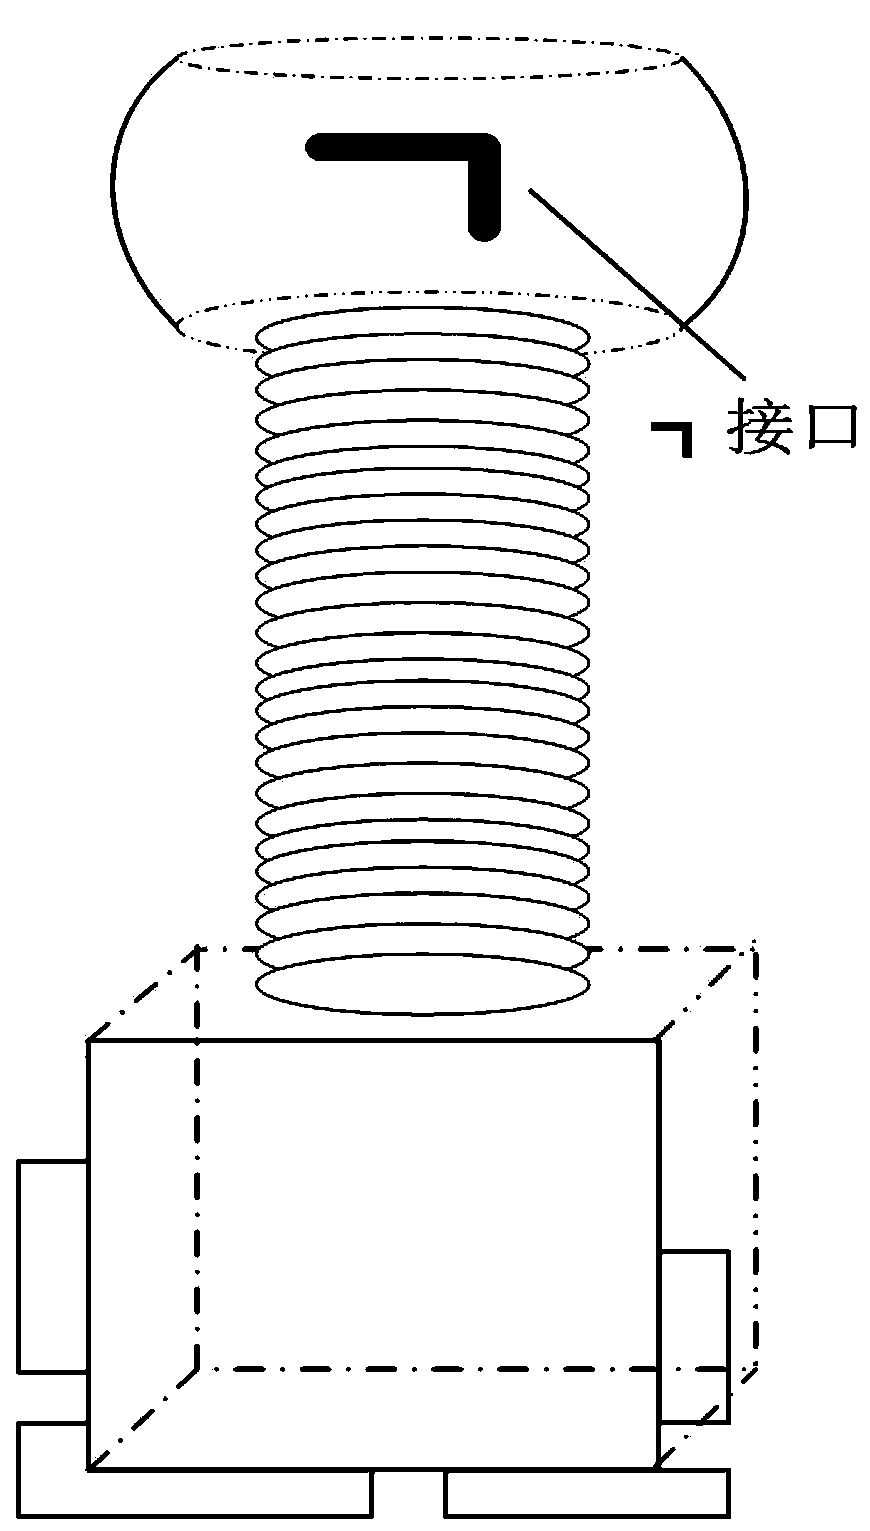 Novel test and operation wire hanging rod